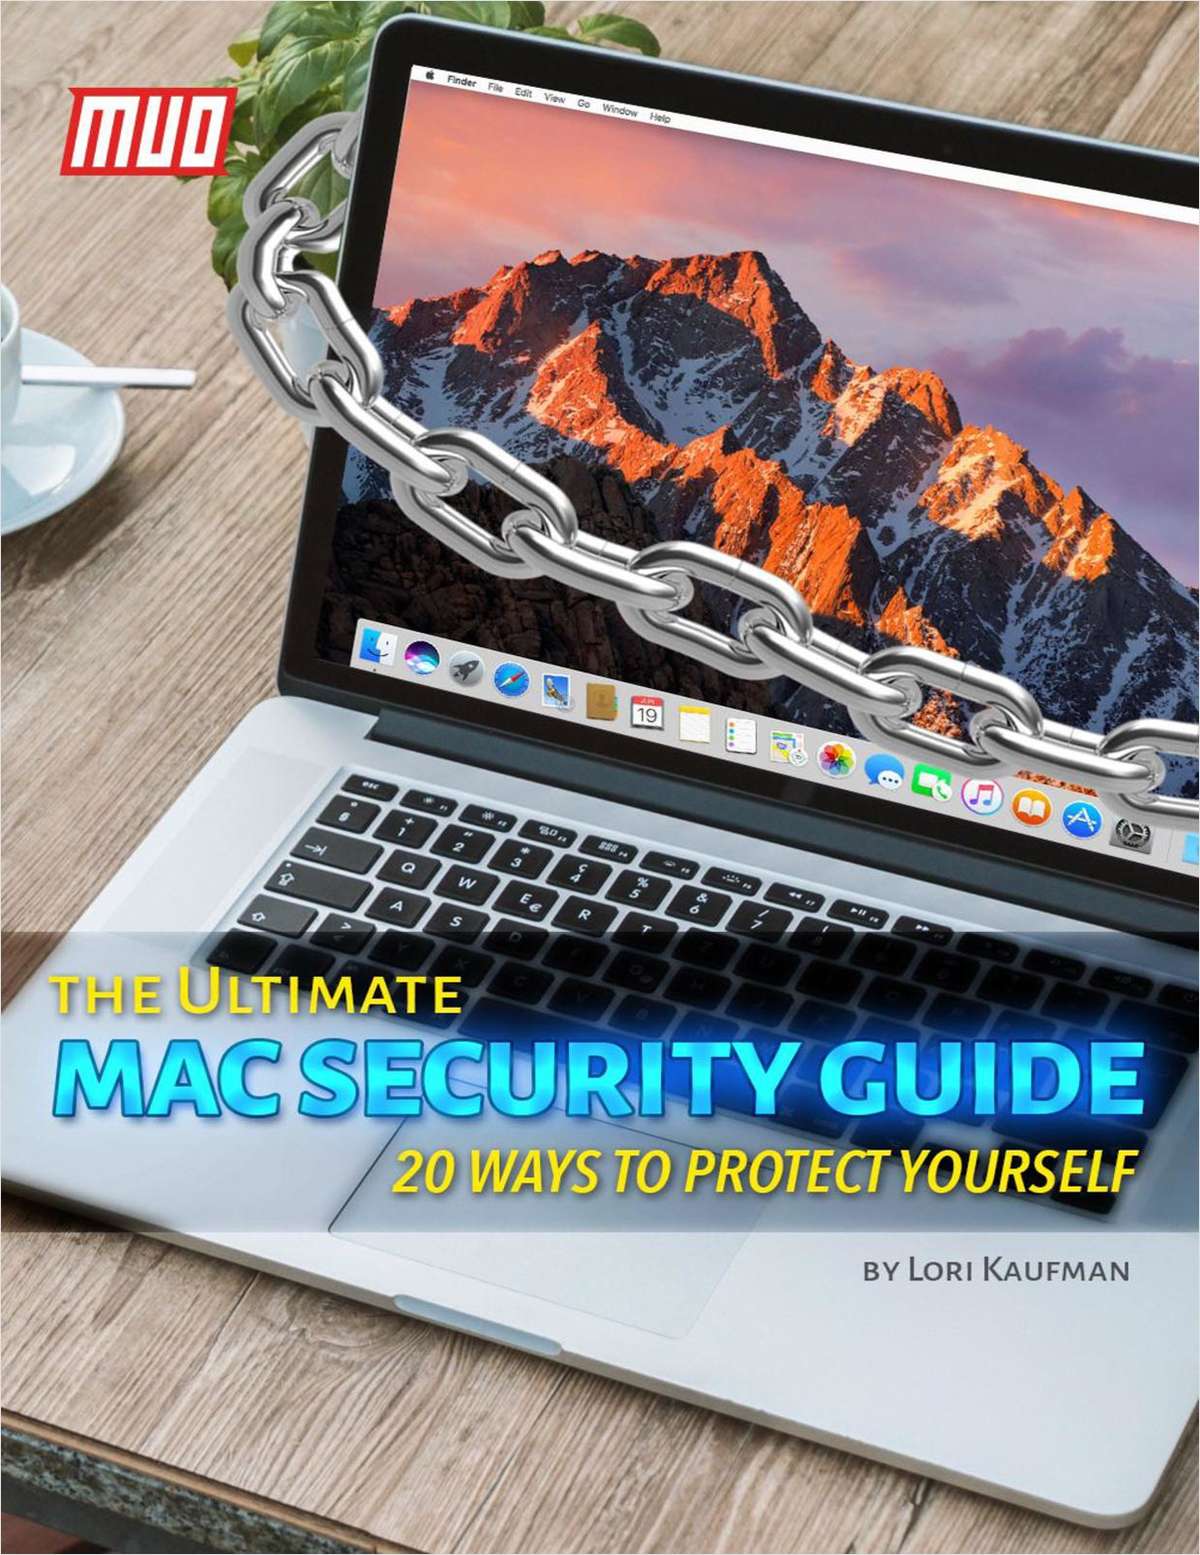 20 Ways to Protect Yourself: The Ultimate Mac Security Guide